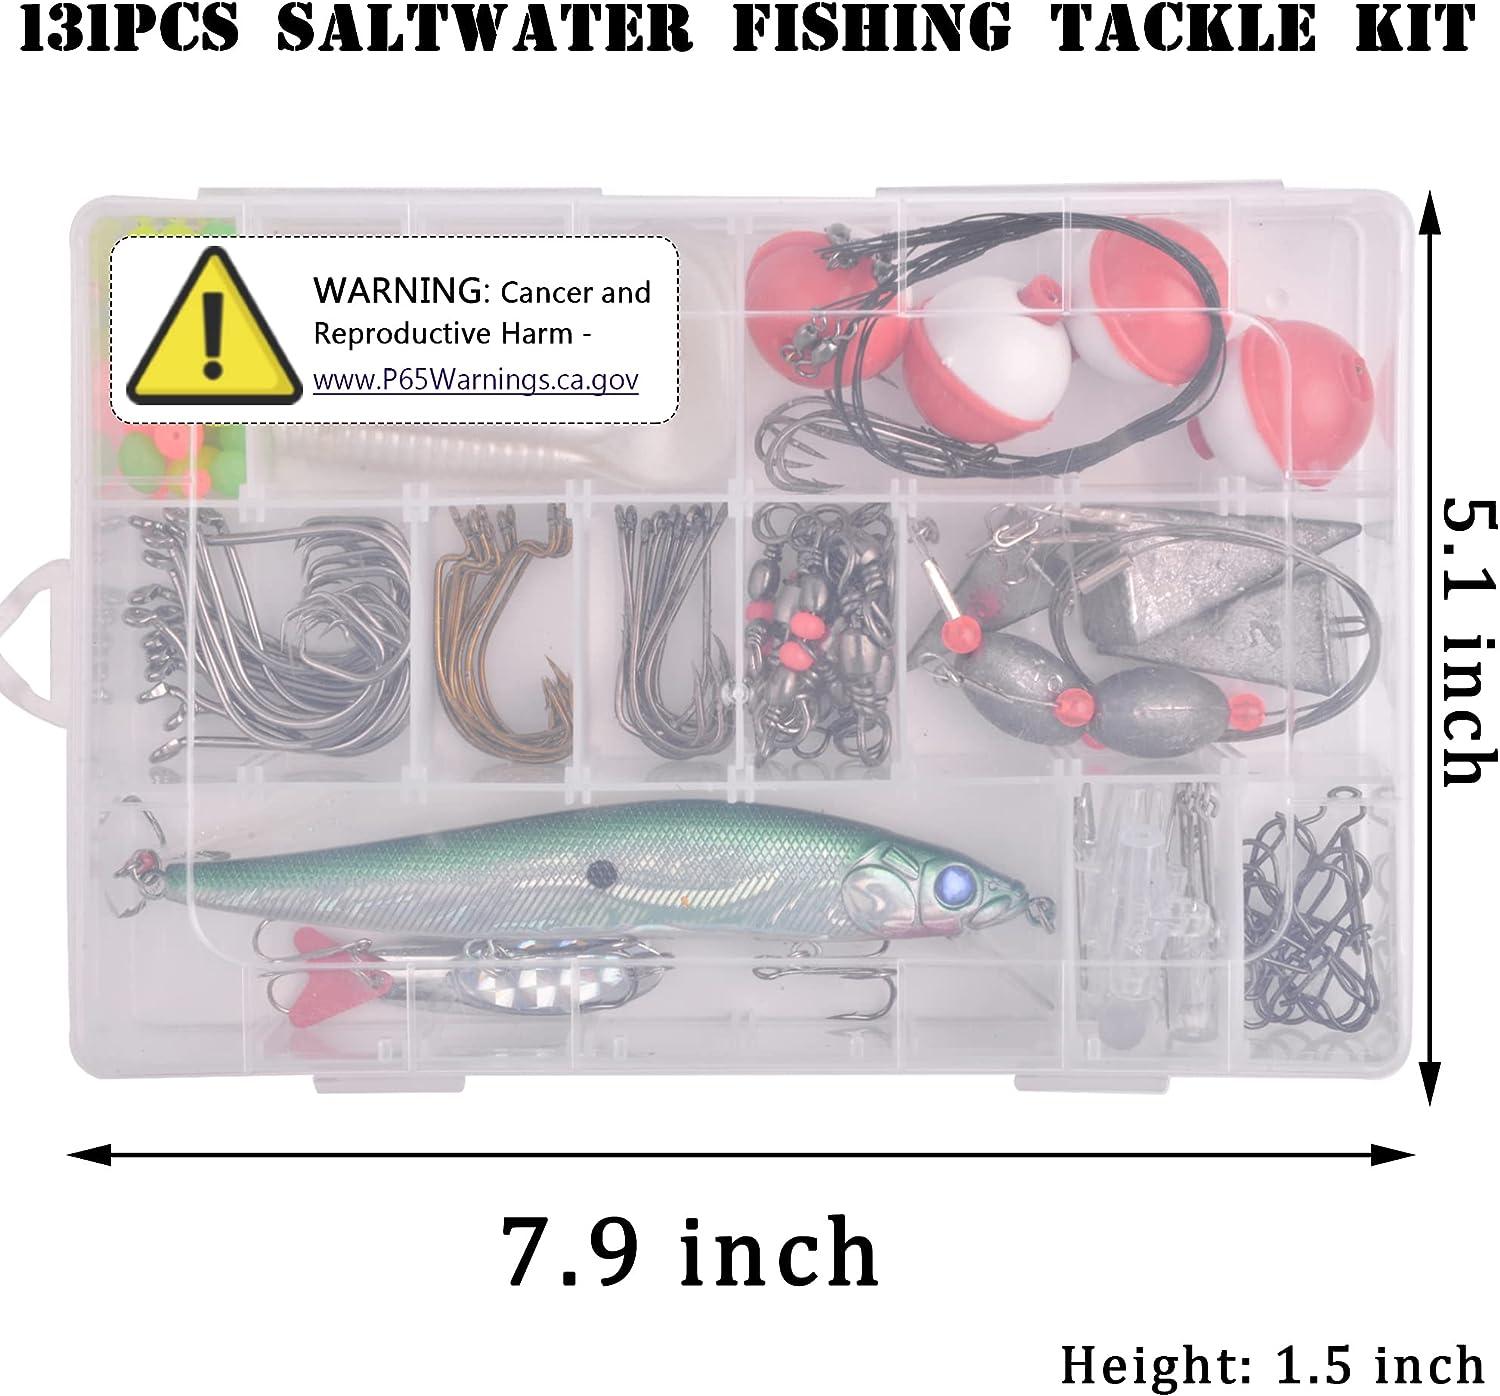  Saltwater Fishing Gear, 131pcs Saltwater Surf Fishing Tackle  Kit Include Saltwater Fishing Lures Fishing Rigs Pyramid Sinker Fishing  Hooks Leader Swivel Spoons Lures Fishing Accessories : Sports & Outdoors